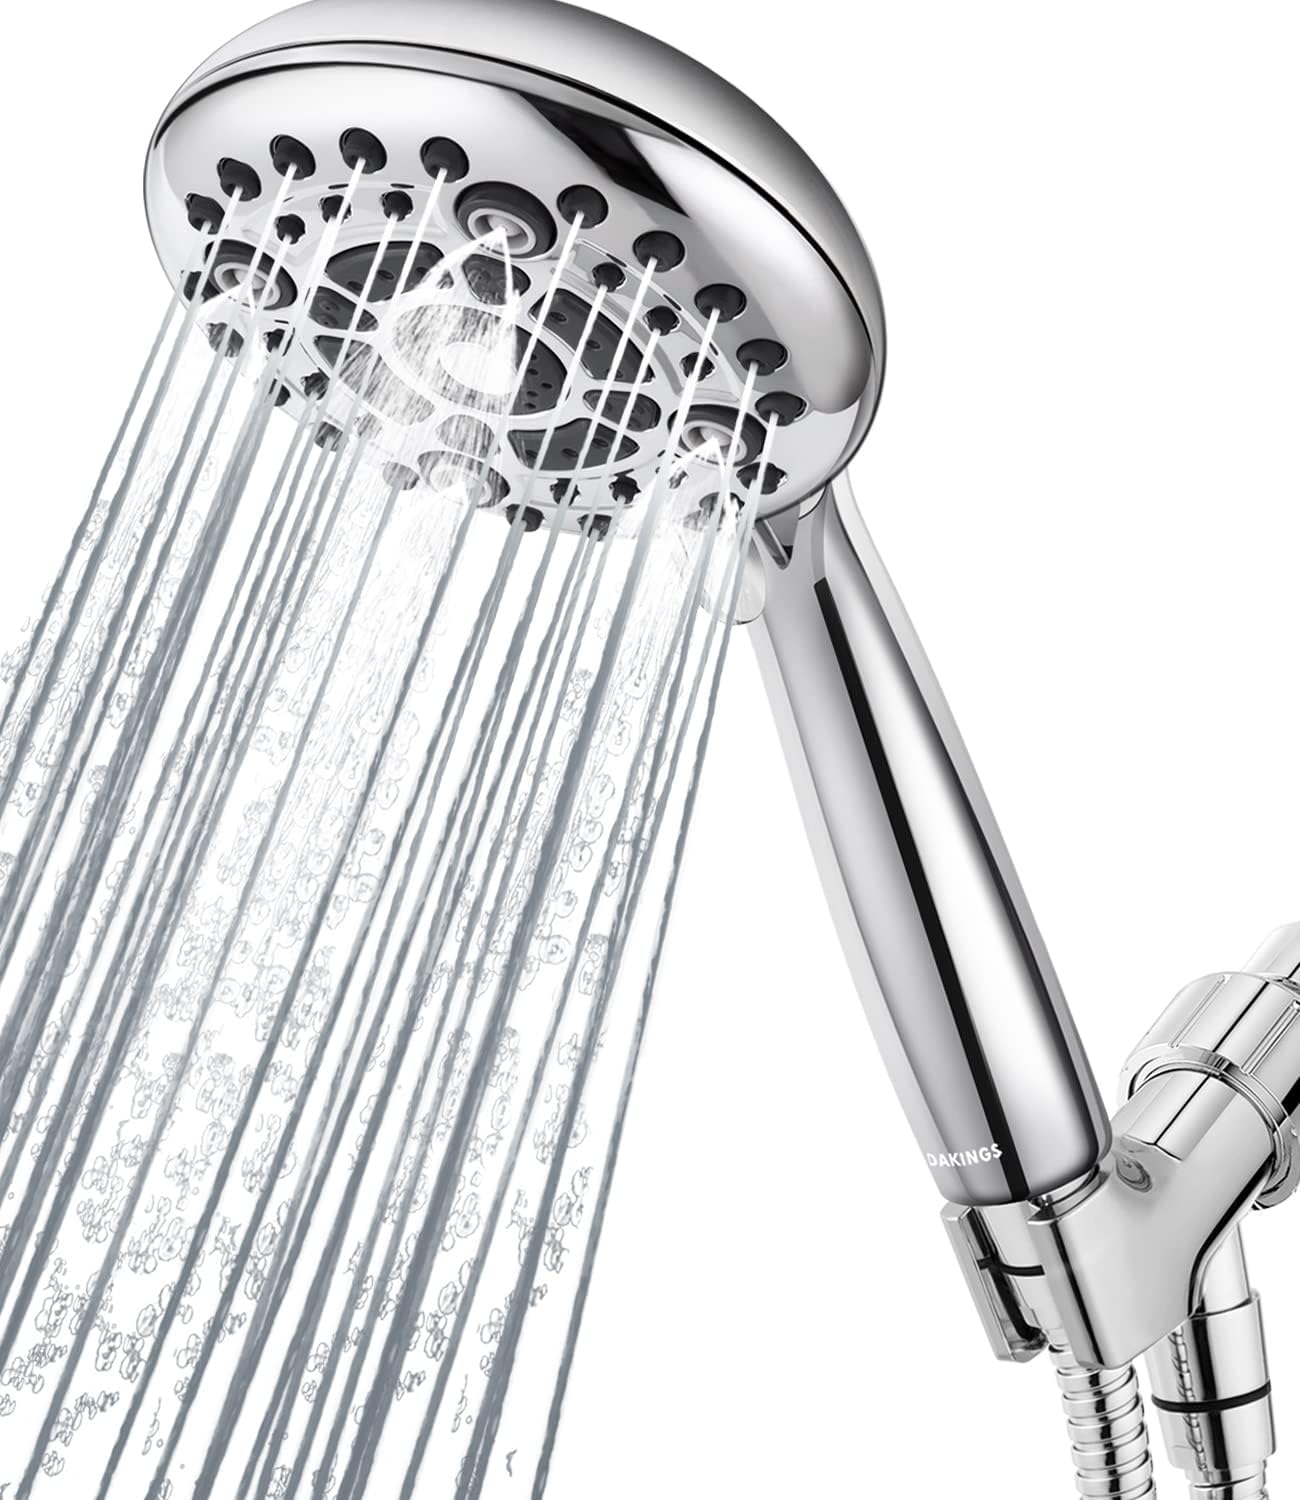 6 Spray Modes High Pressure Handheld Showerhead Set Upgraded 5 Inches Premium Chrome 60 Inches Stainless Steel Hose For Low Water Pressure